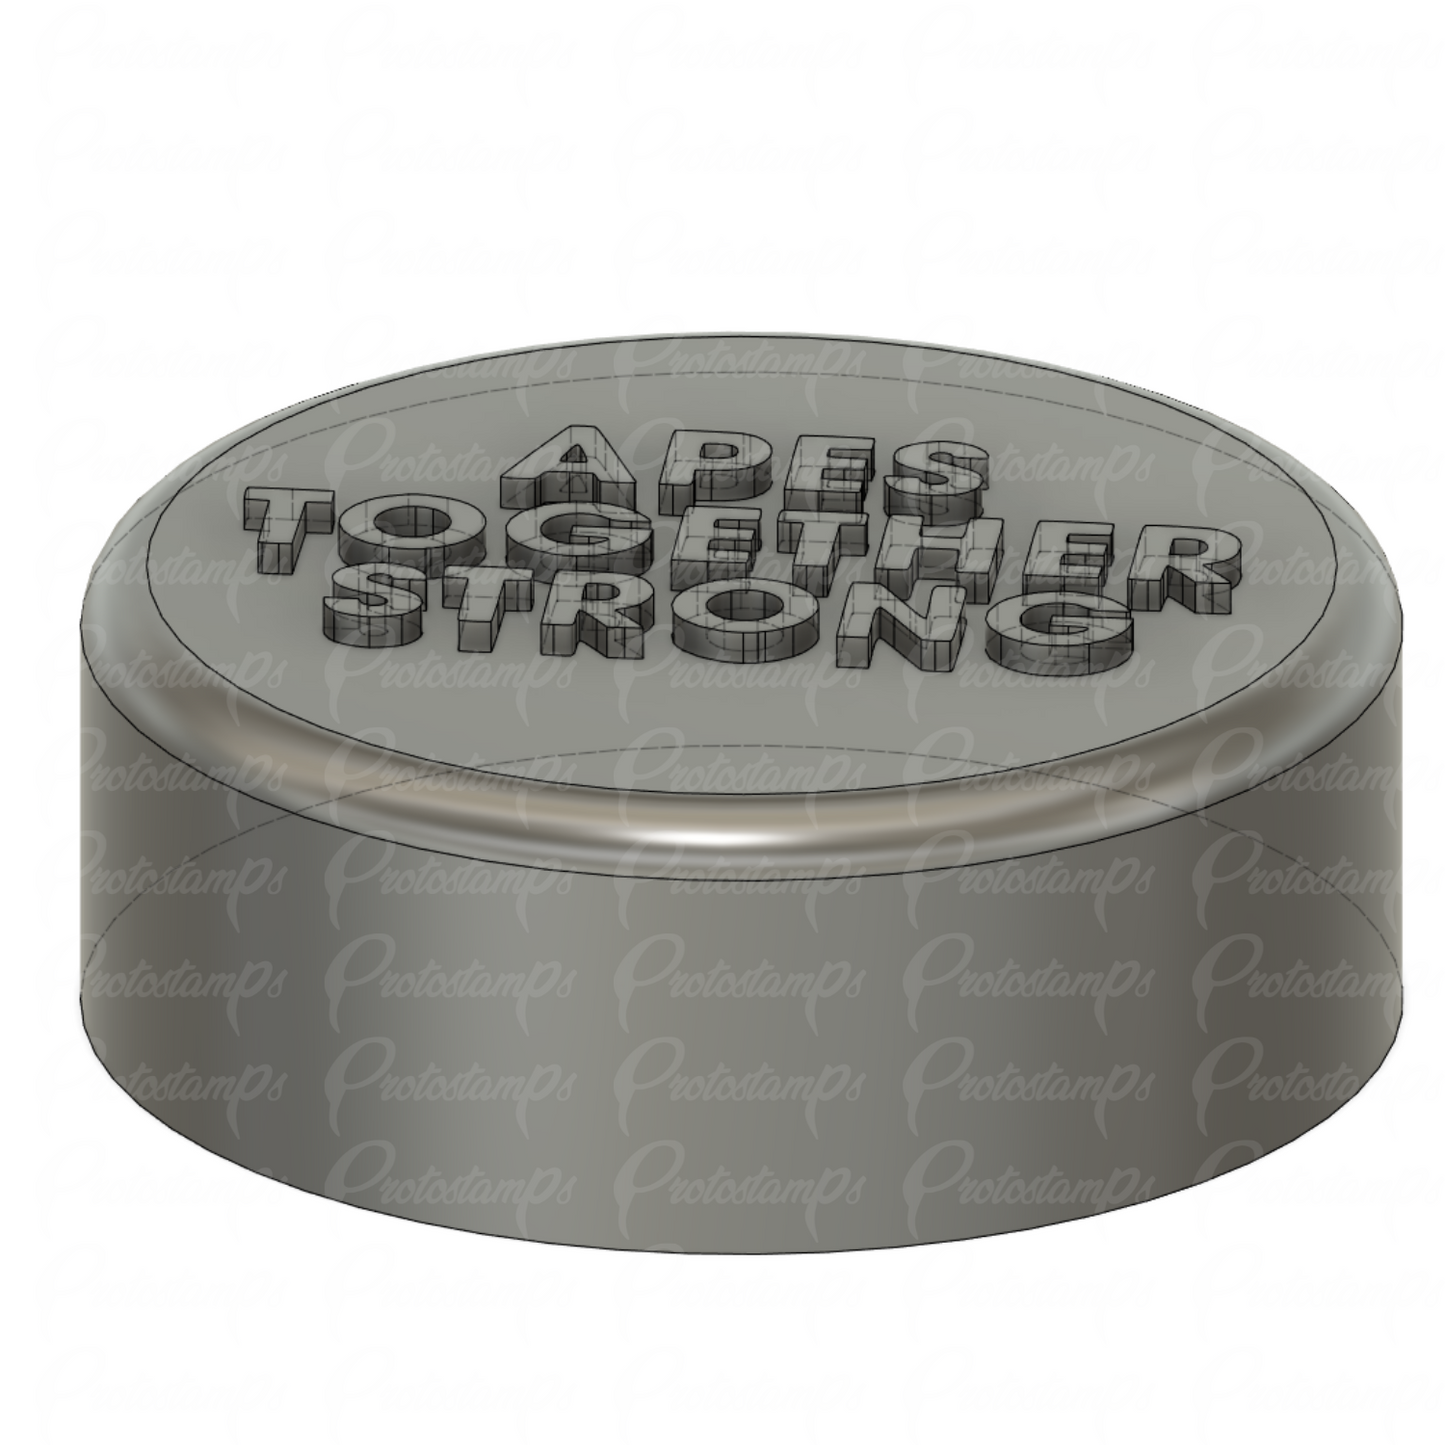 1 - 50mm Brass Stamp and 1 50mm Graphite Stamp, Price Includes Shipping